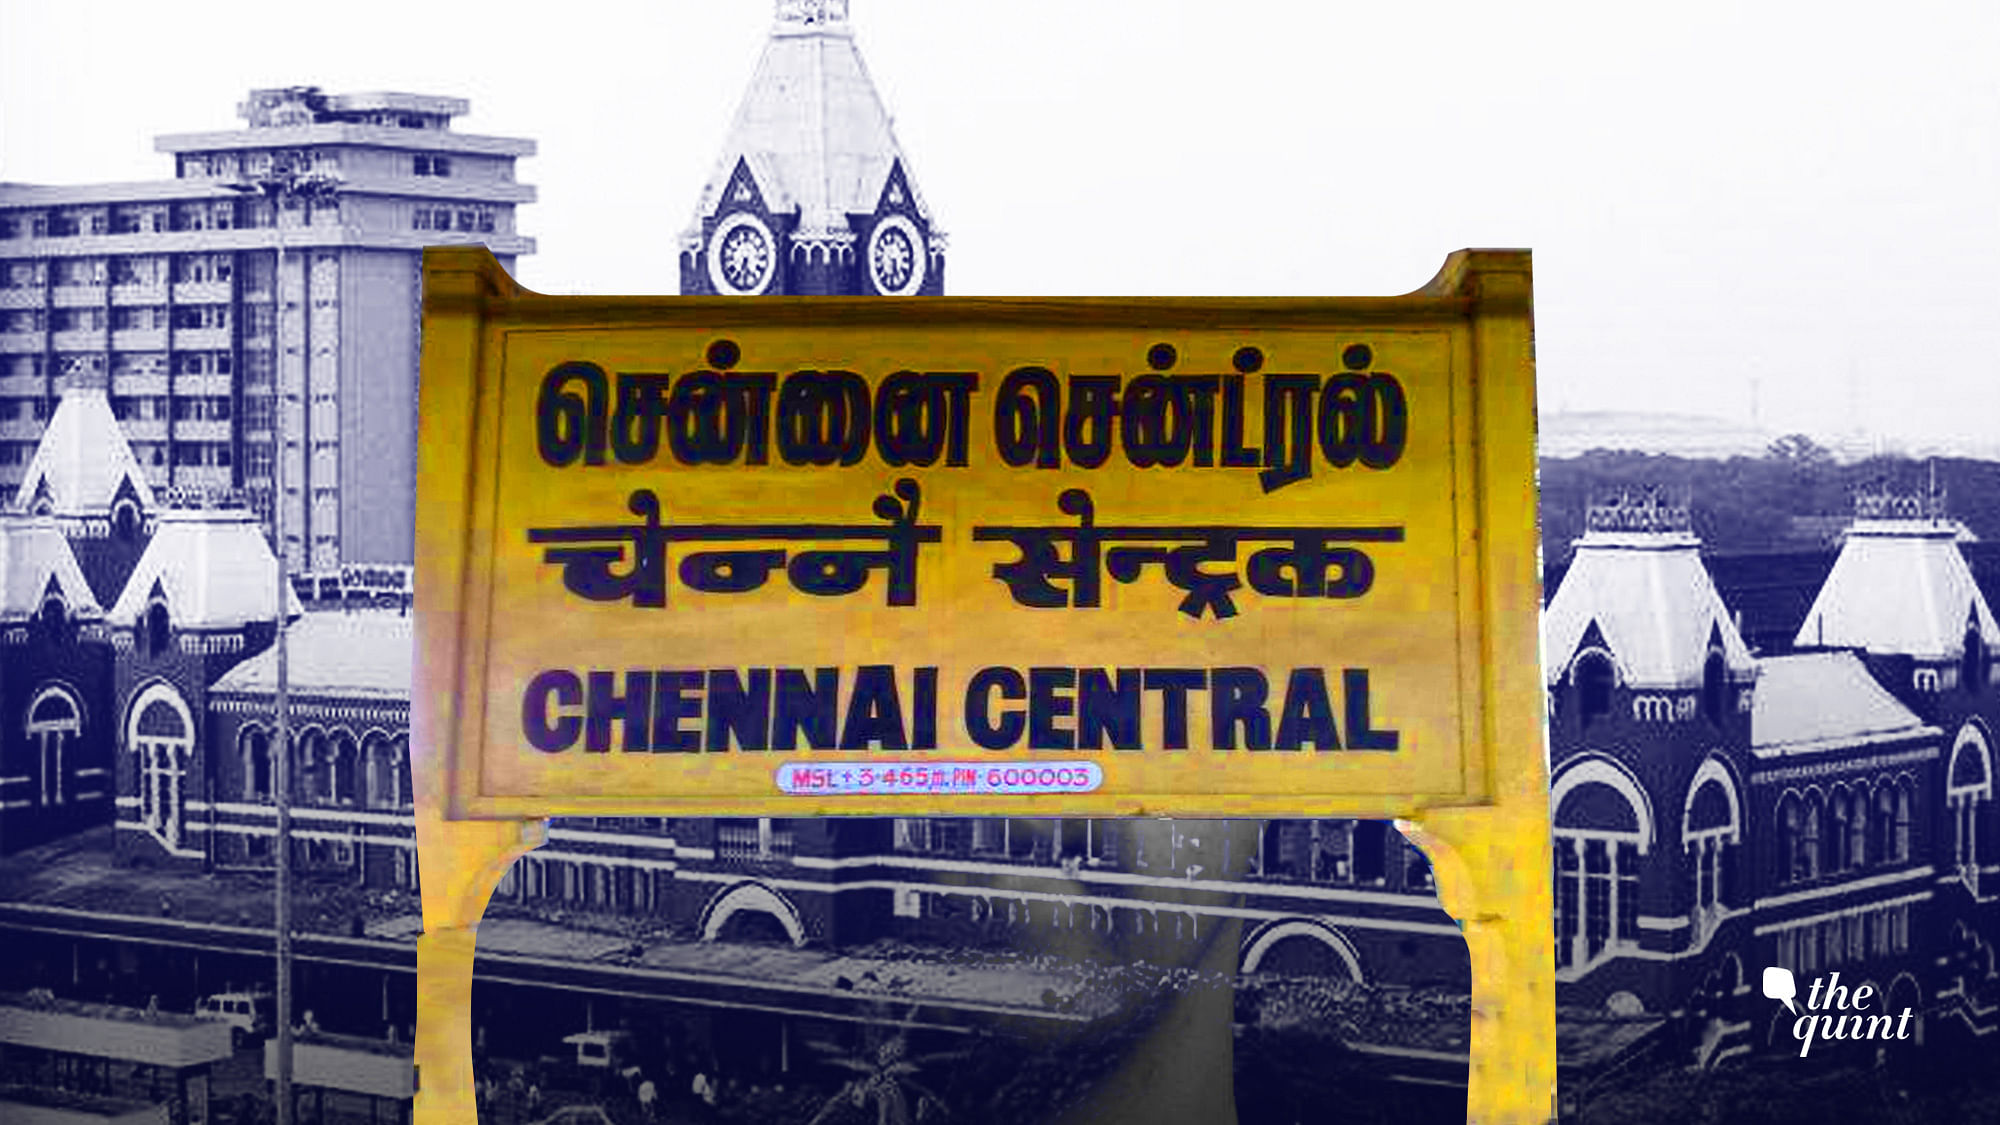 The Central station, as it is fondly called, is to Chennai what filter coffee is to Madras.